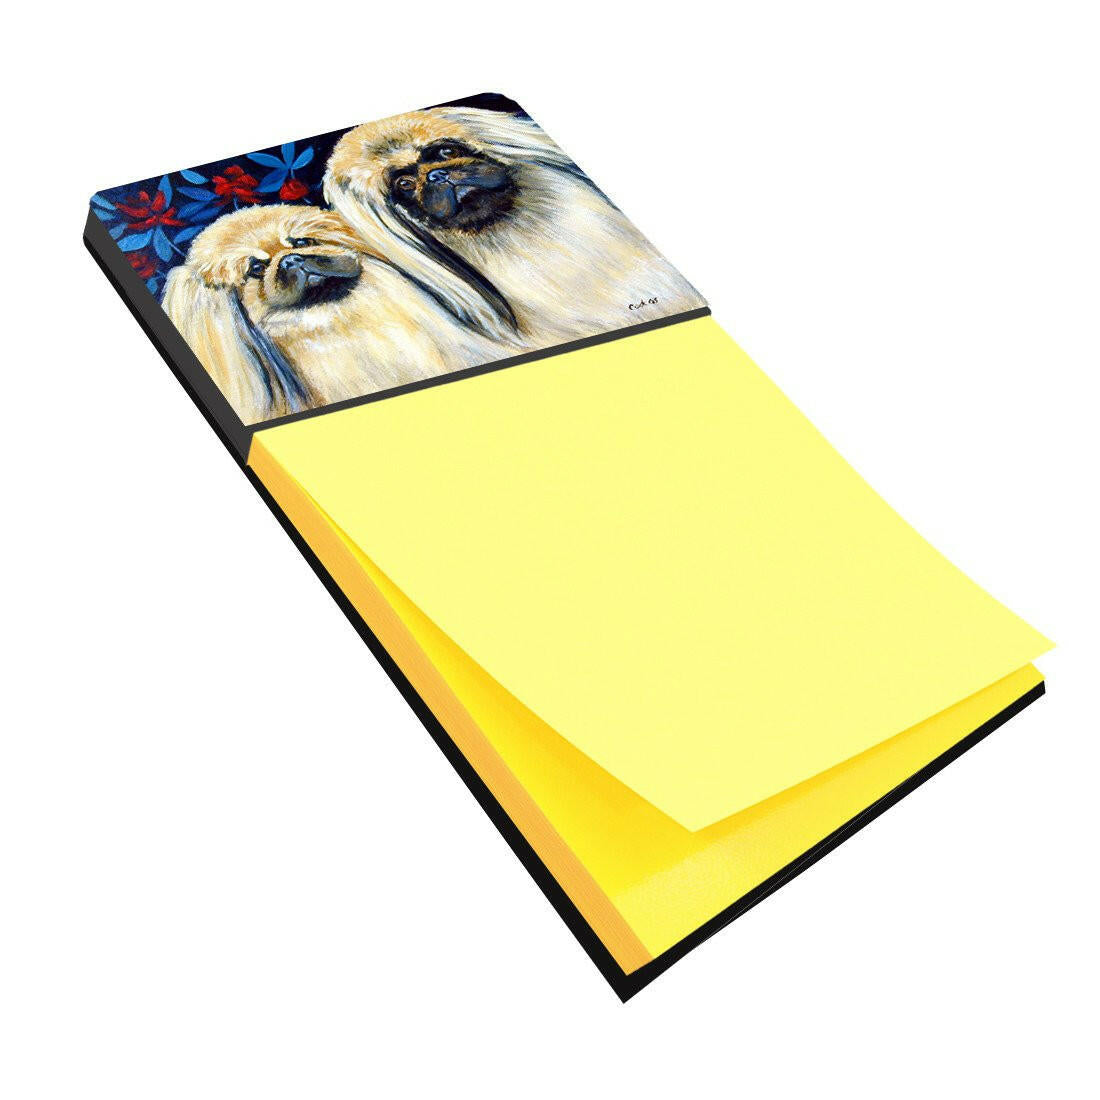 What a pair of Pekingese Refiillable Sticky Note Holder or Postit Note Dispenser 7193SN by Caroline's Treasures